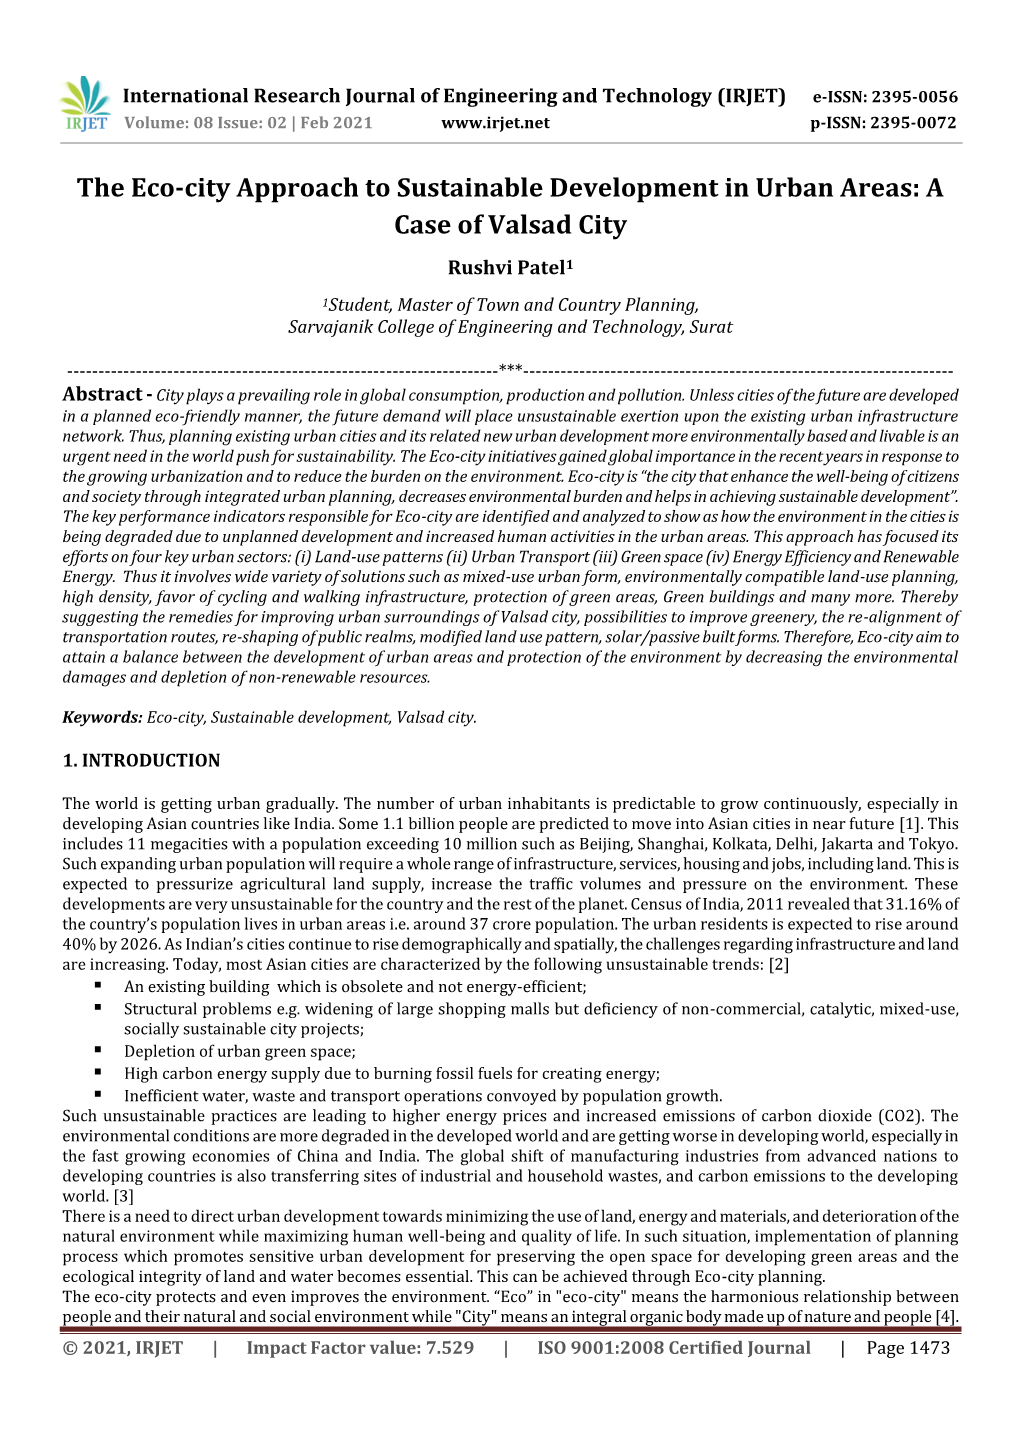 The Eco-City Approach to Sustainable Development in Urban Areas: a Case of Valsad City Rushvi Patel1